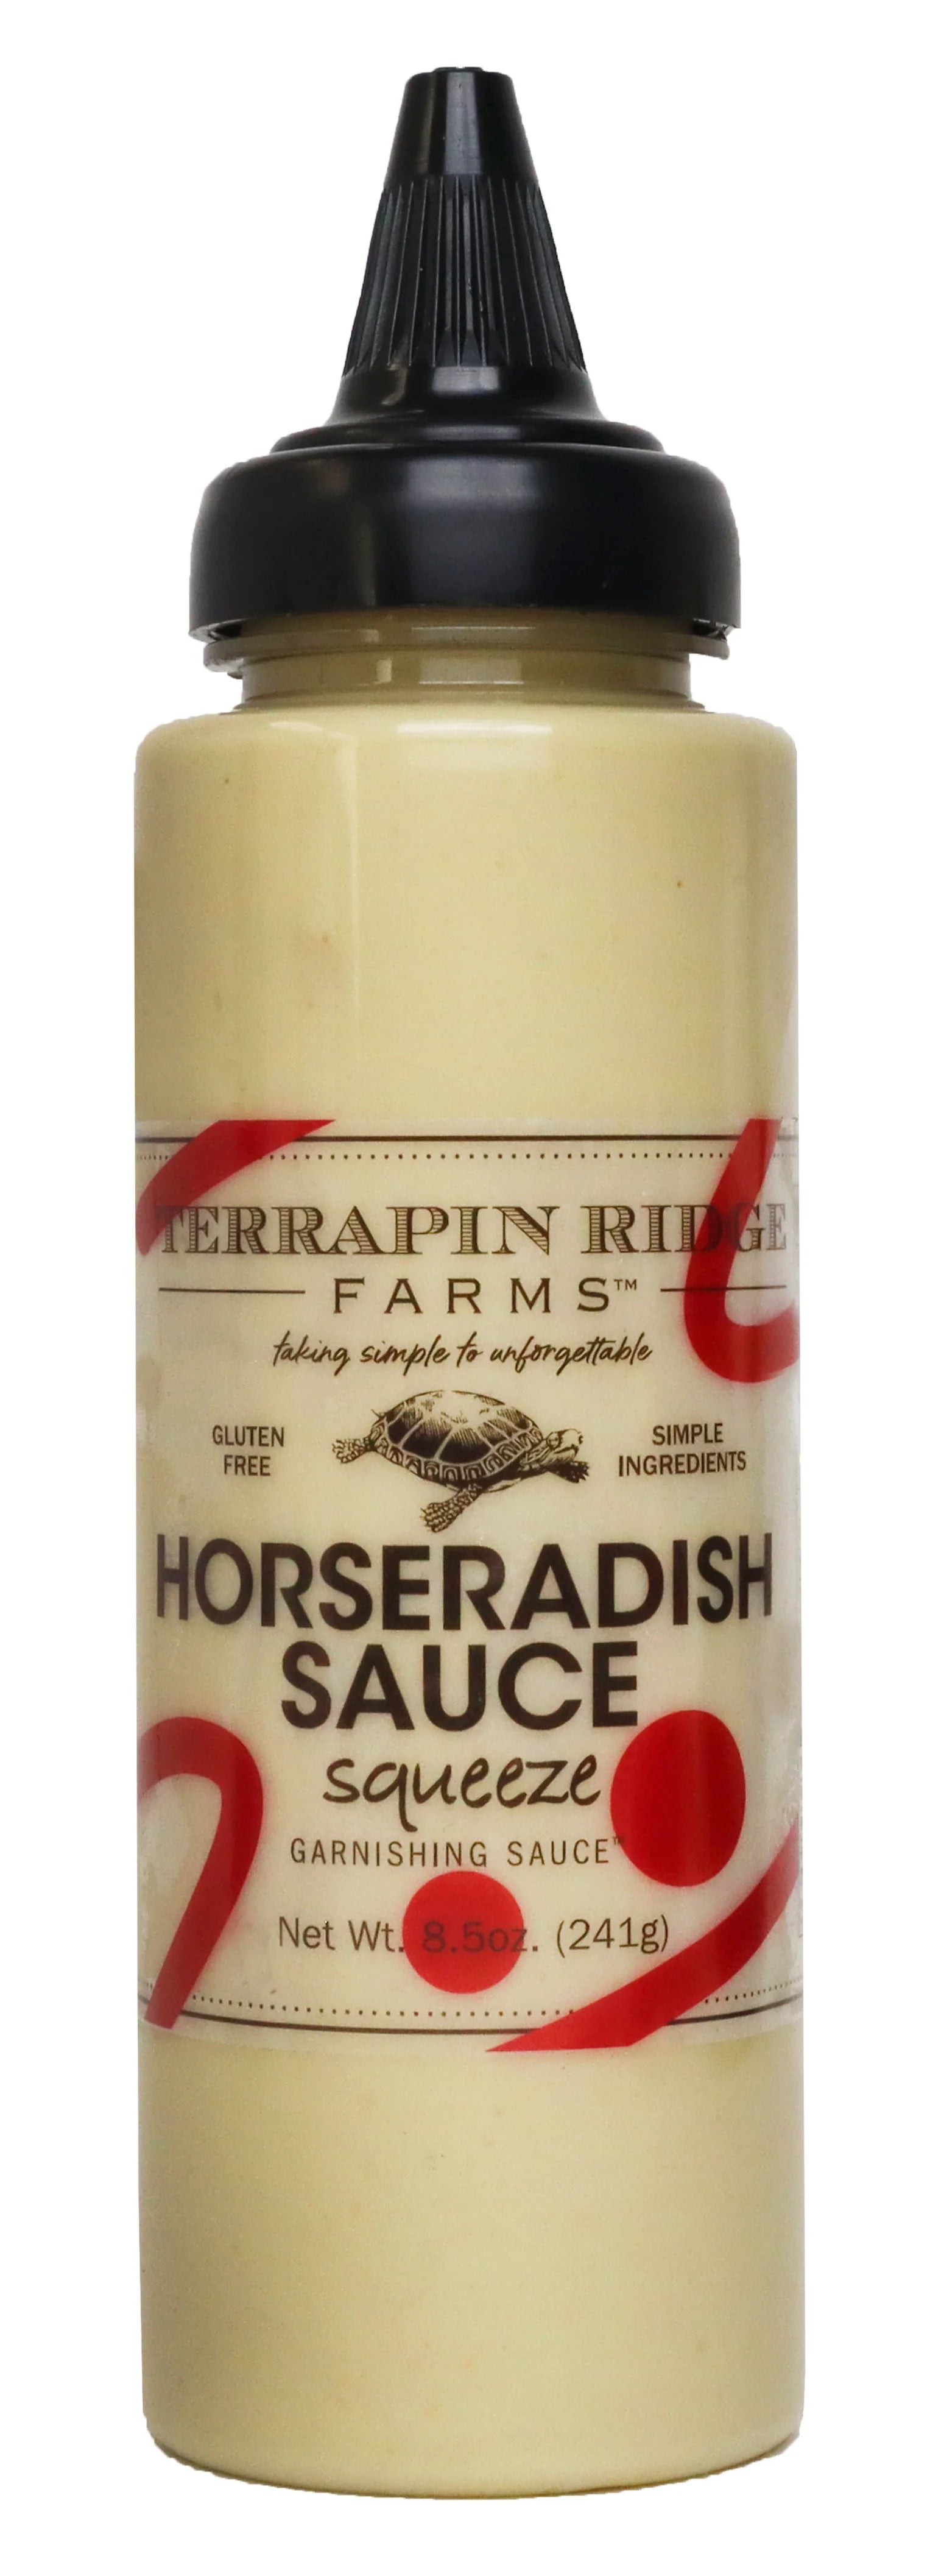 A Terrapin Ridge Horseradish Sauce Squeeze on a white background.